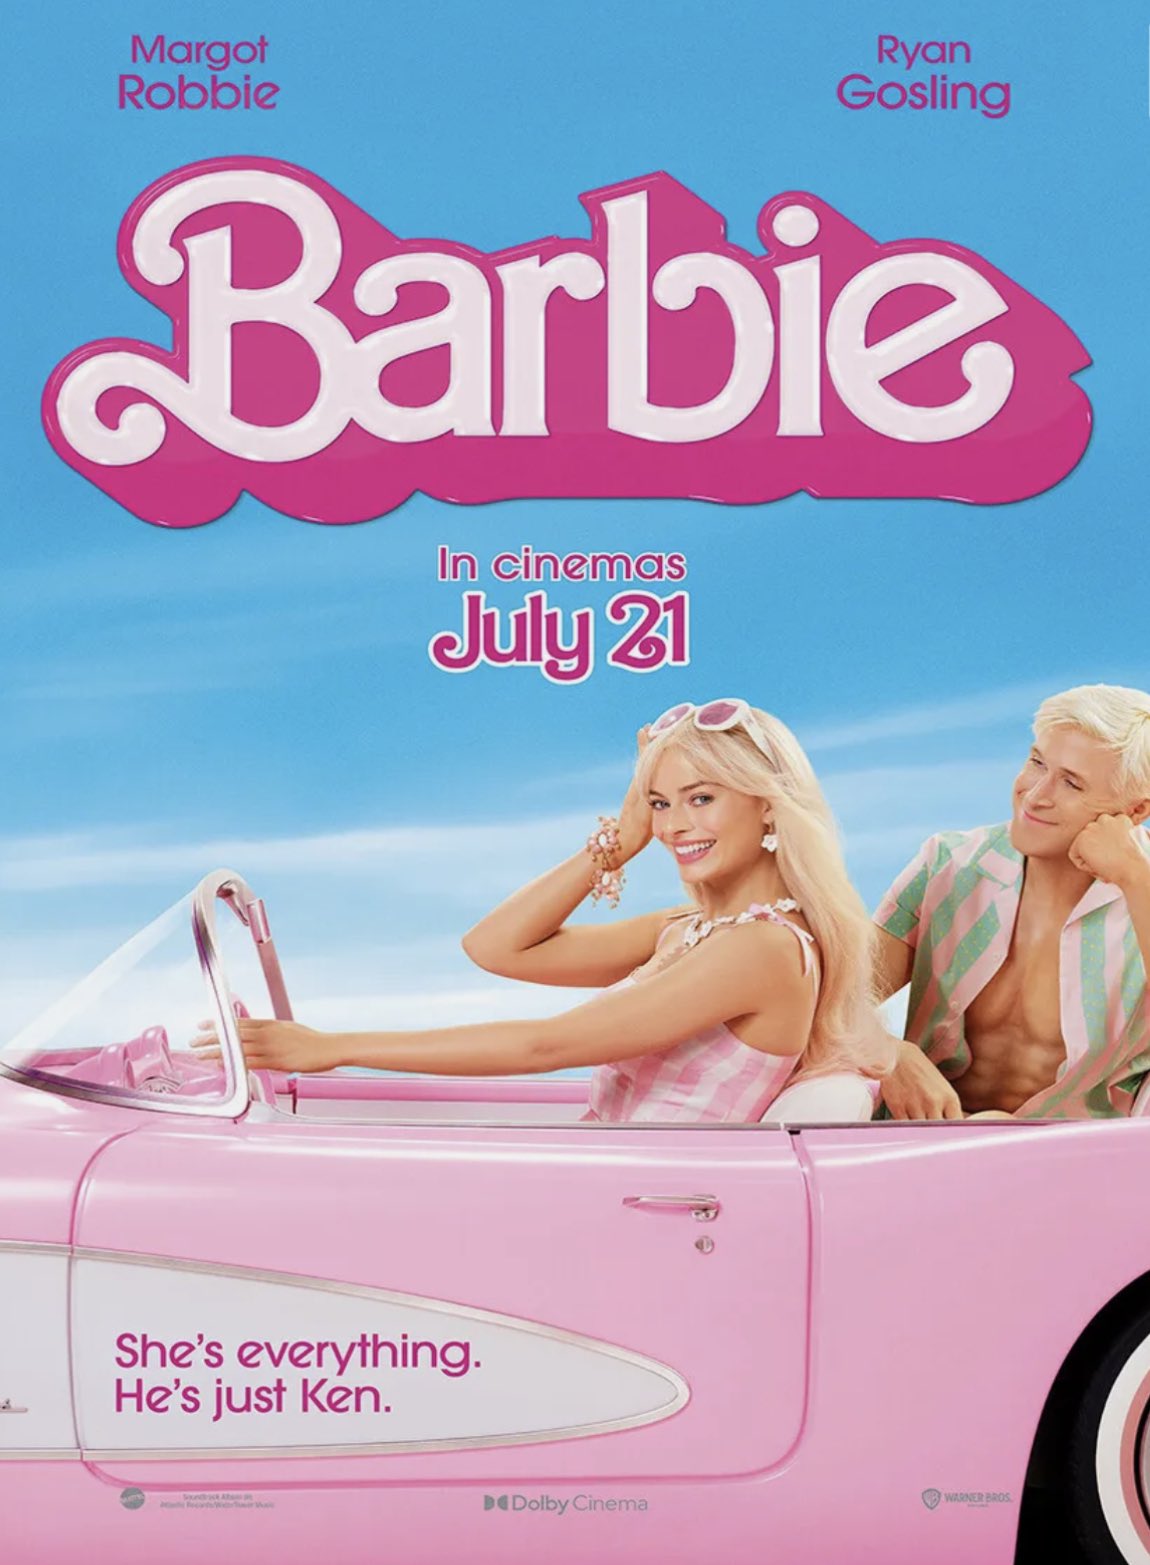 Andesbjergene kjole bredde Scott McFarnell on Twitter: "Saw both movies today. 'Oppenheimer' v 'Barbie'.  Brilliant time for a film fan. 'Oppenheimer' followed a traditional  approach to film-making. 'Barbie' was ironically more philosophical (&amp;  more fun).